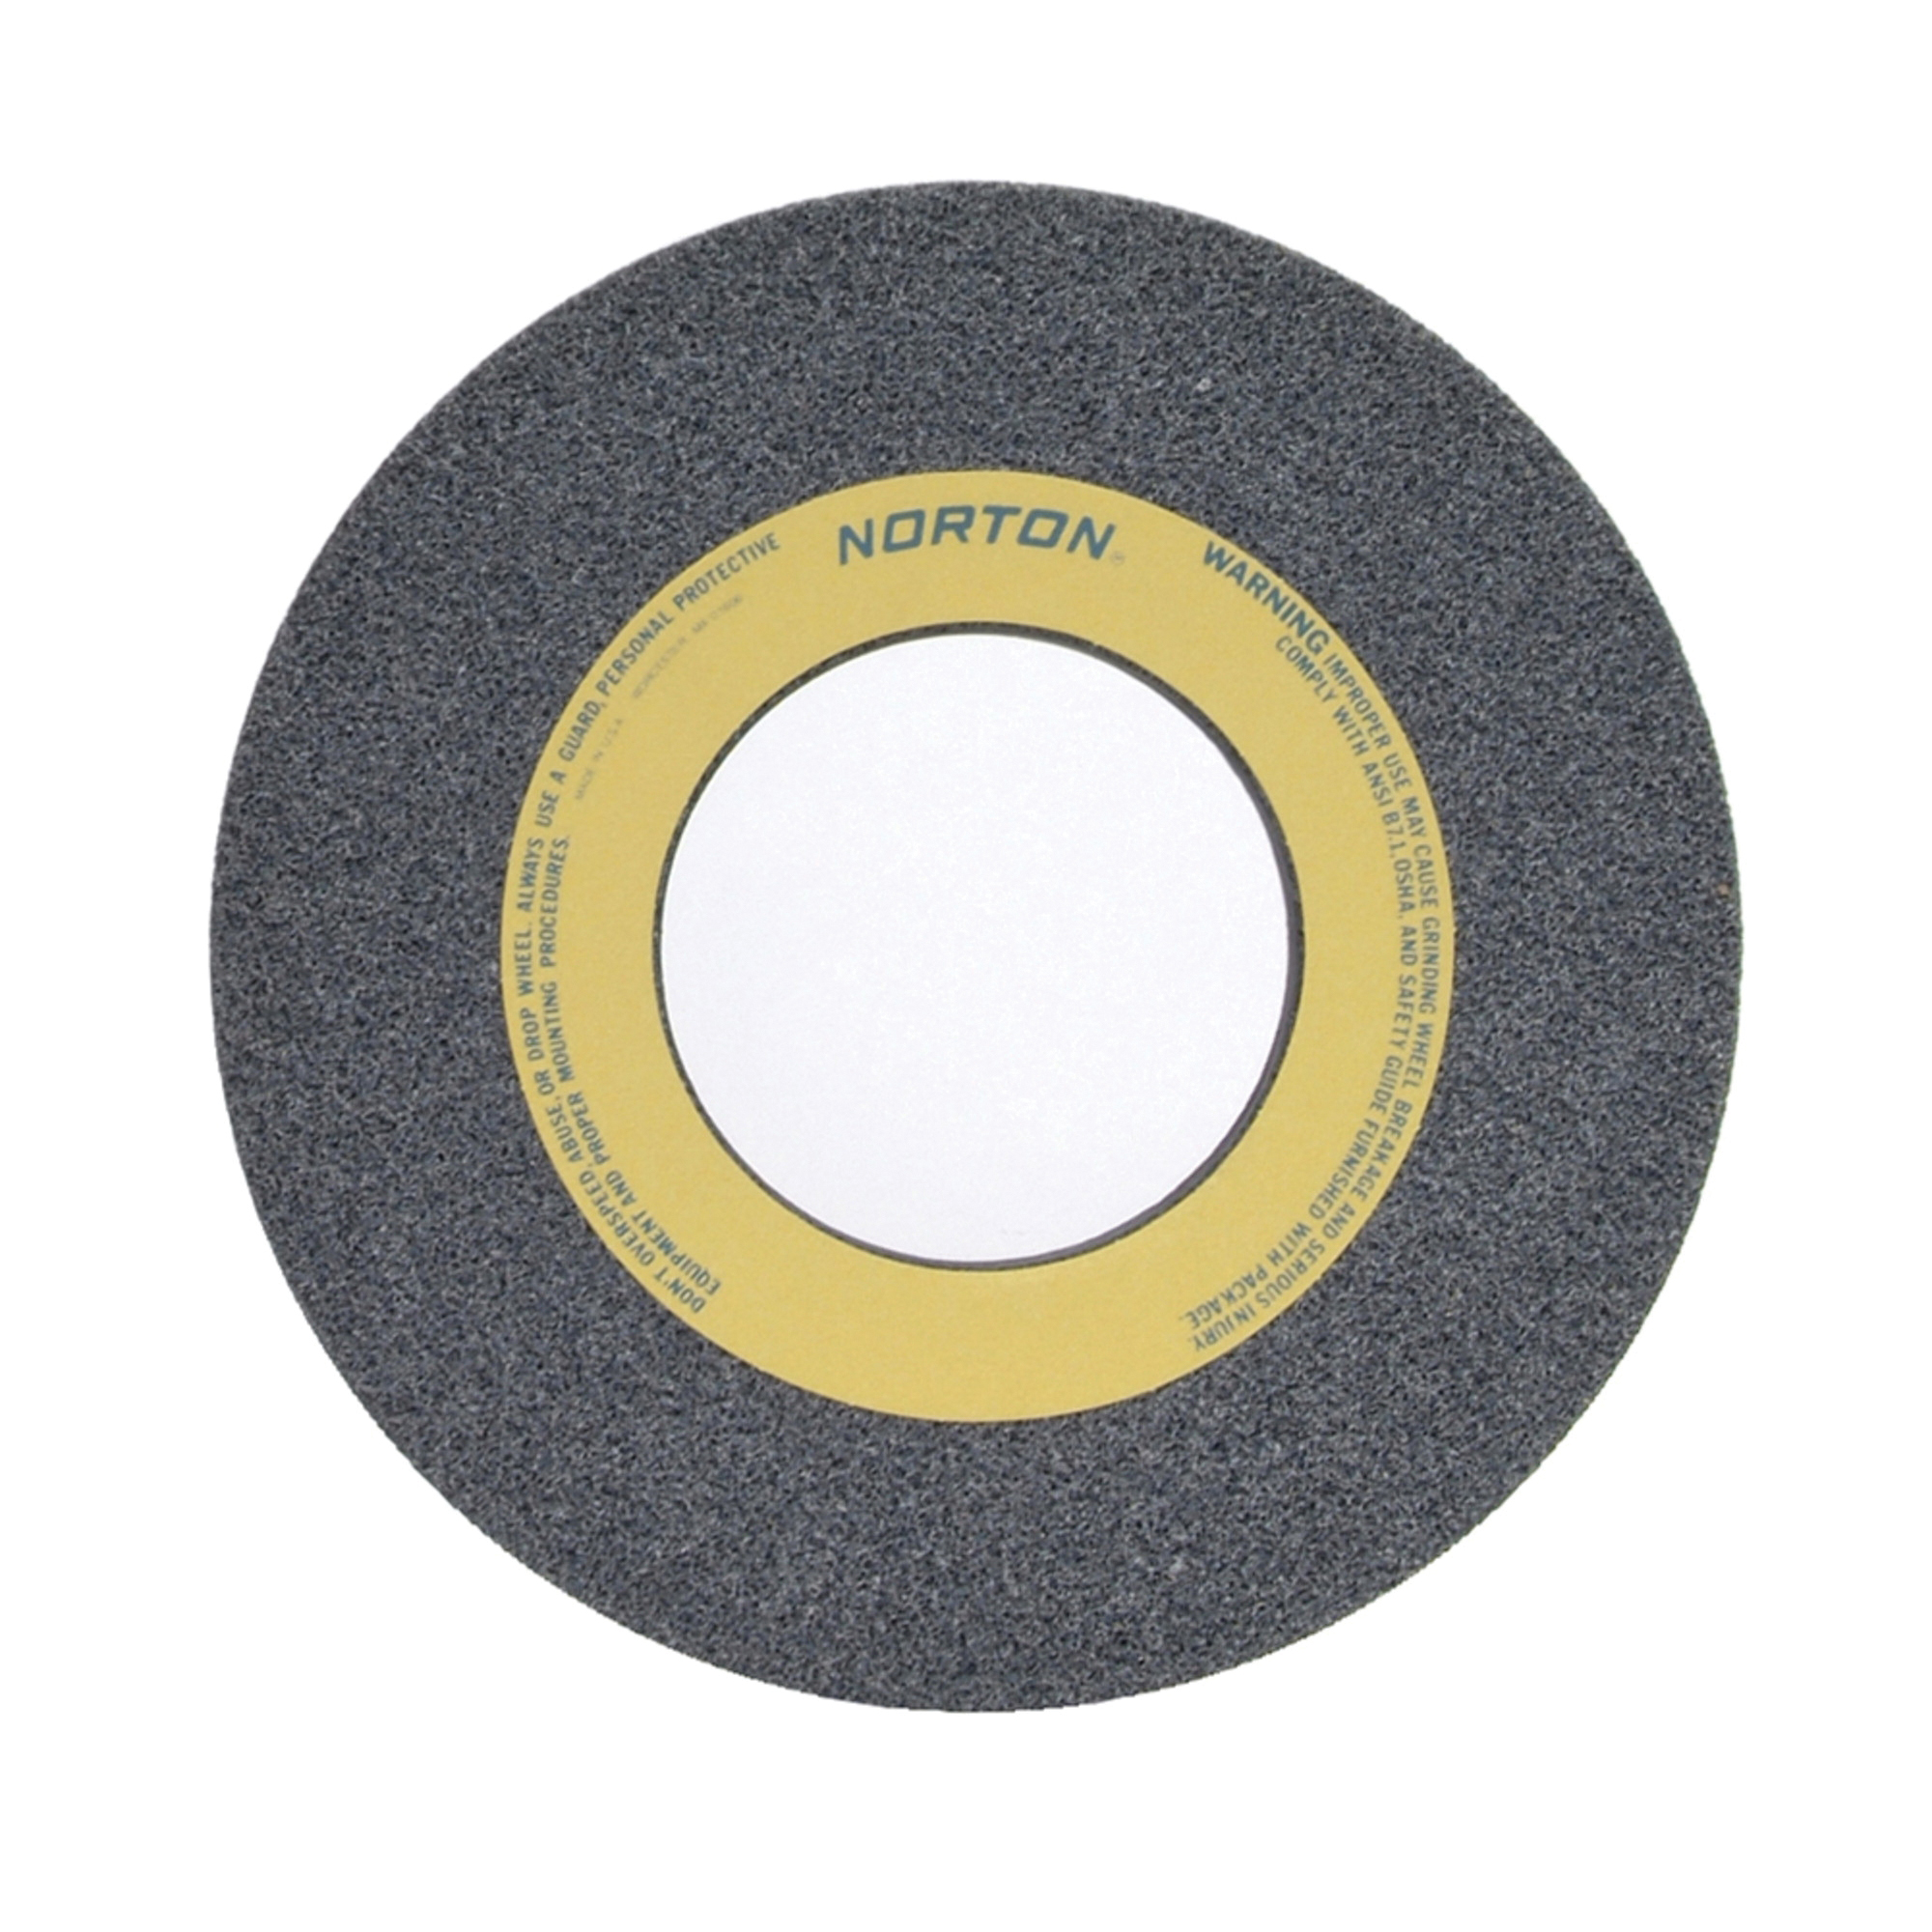 Norton® 66253364337 32A Straight Toolroom Wheel, 14 in Dia x 1-1/2 in THK, 5 in Center Hole, 46 Grit, Aluminum Oxide Abrasive